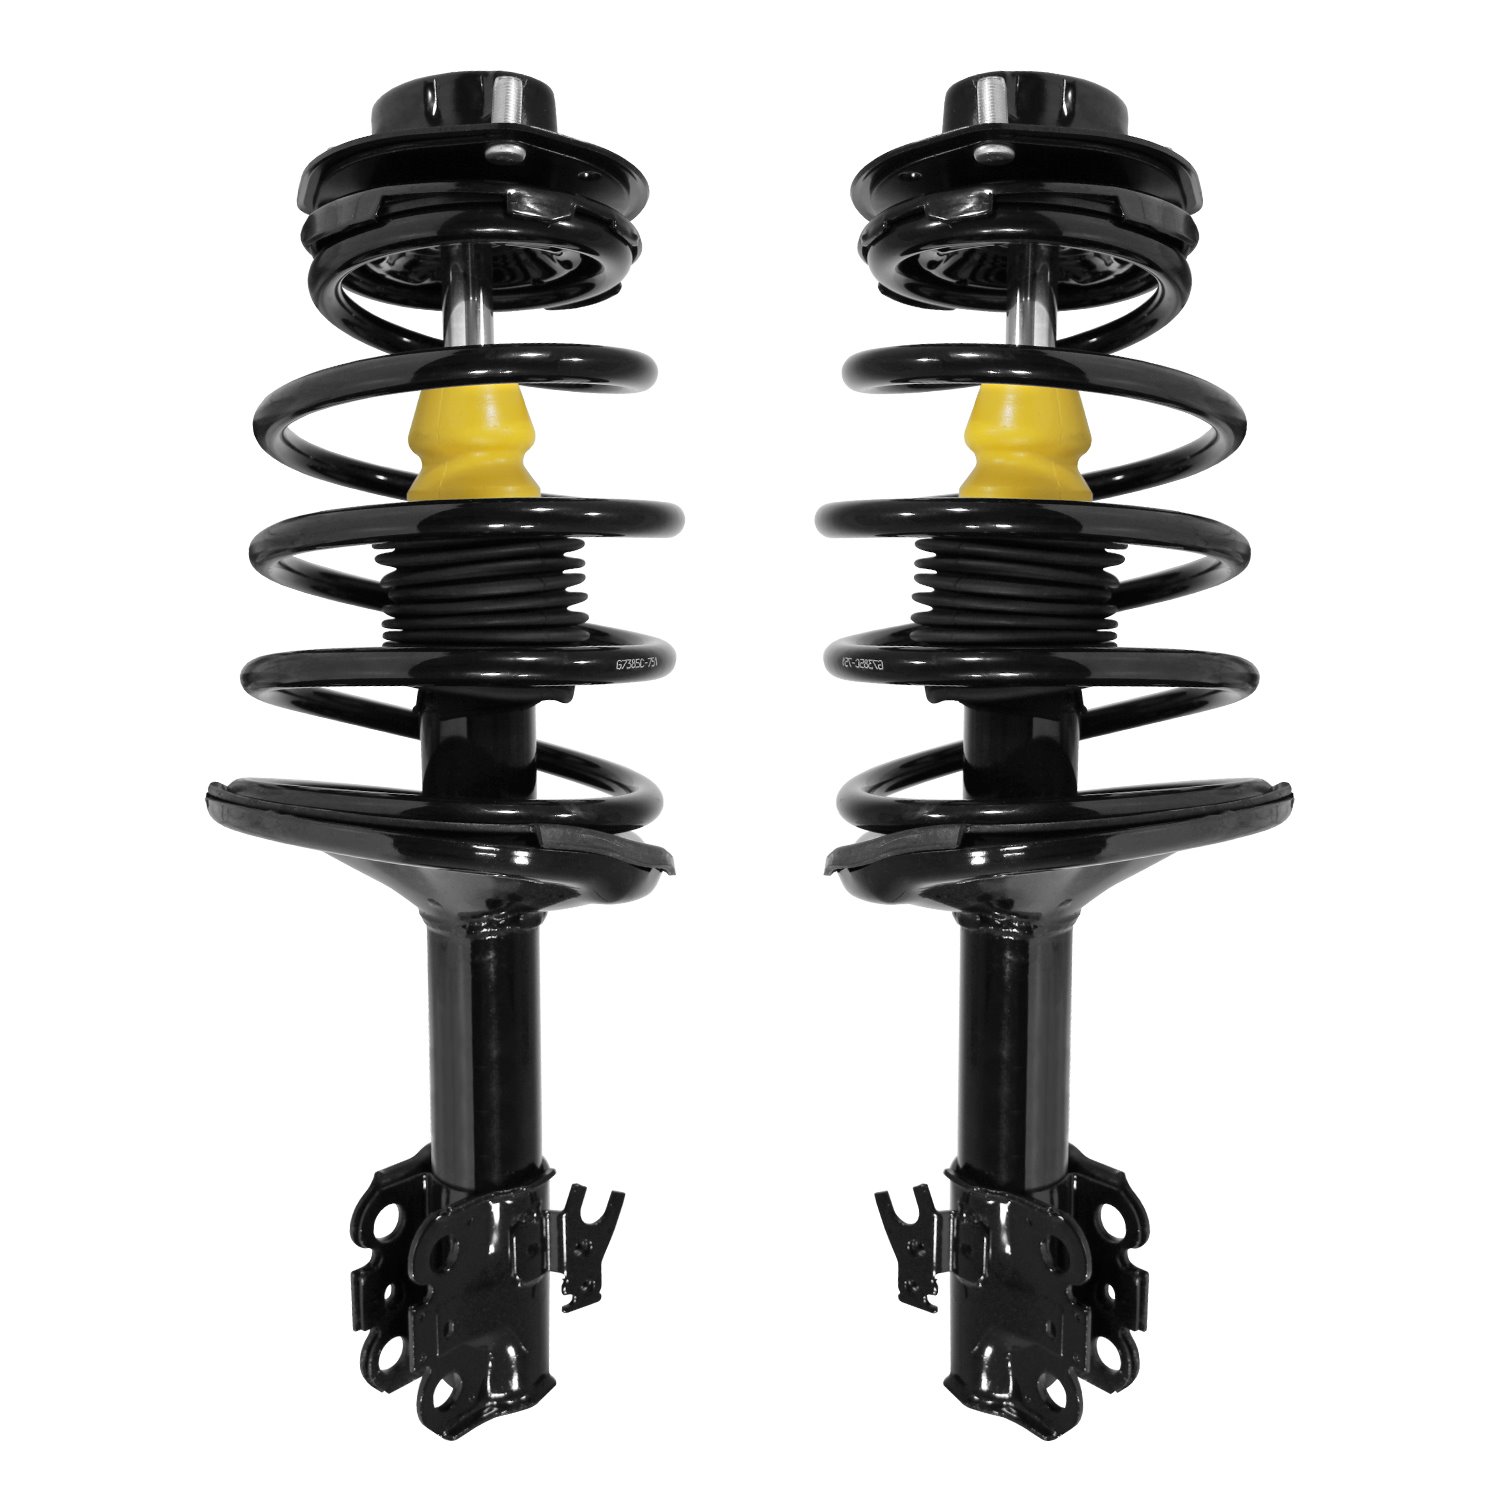 2-11551-11552-001 Suspension Strut & Coil Spring Assembly Set Fits Select Toyota Camry